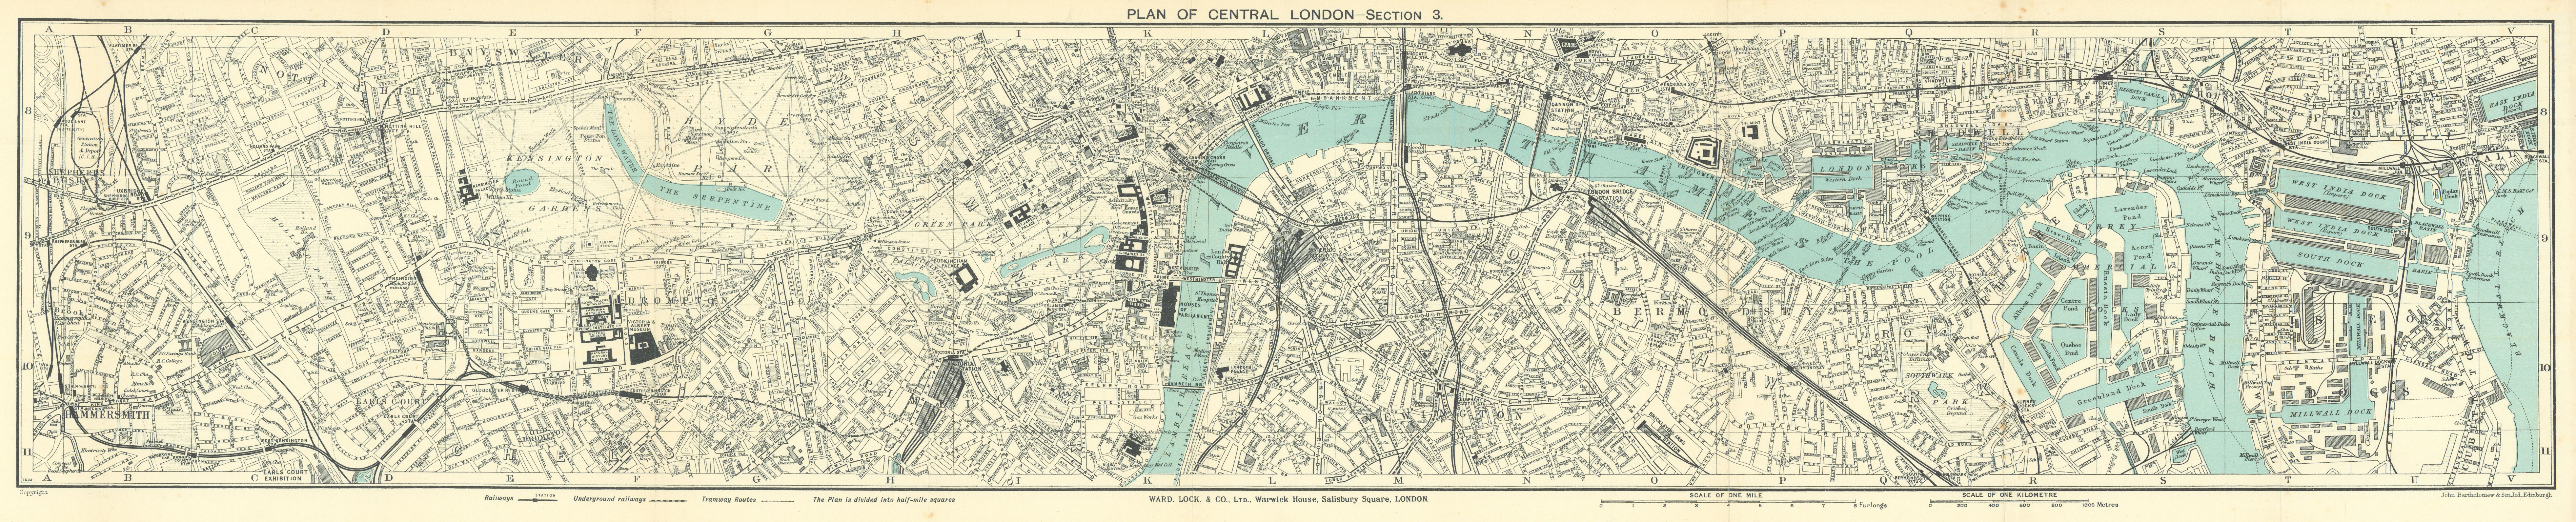 Associate Product CENTRAL LONDON-SECTION 3 vintage town/city plan. London. WARD LOCK 1936 map